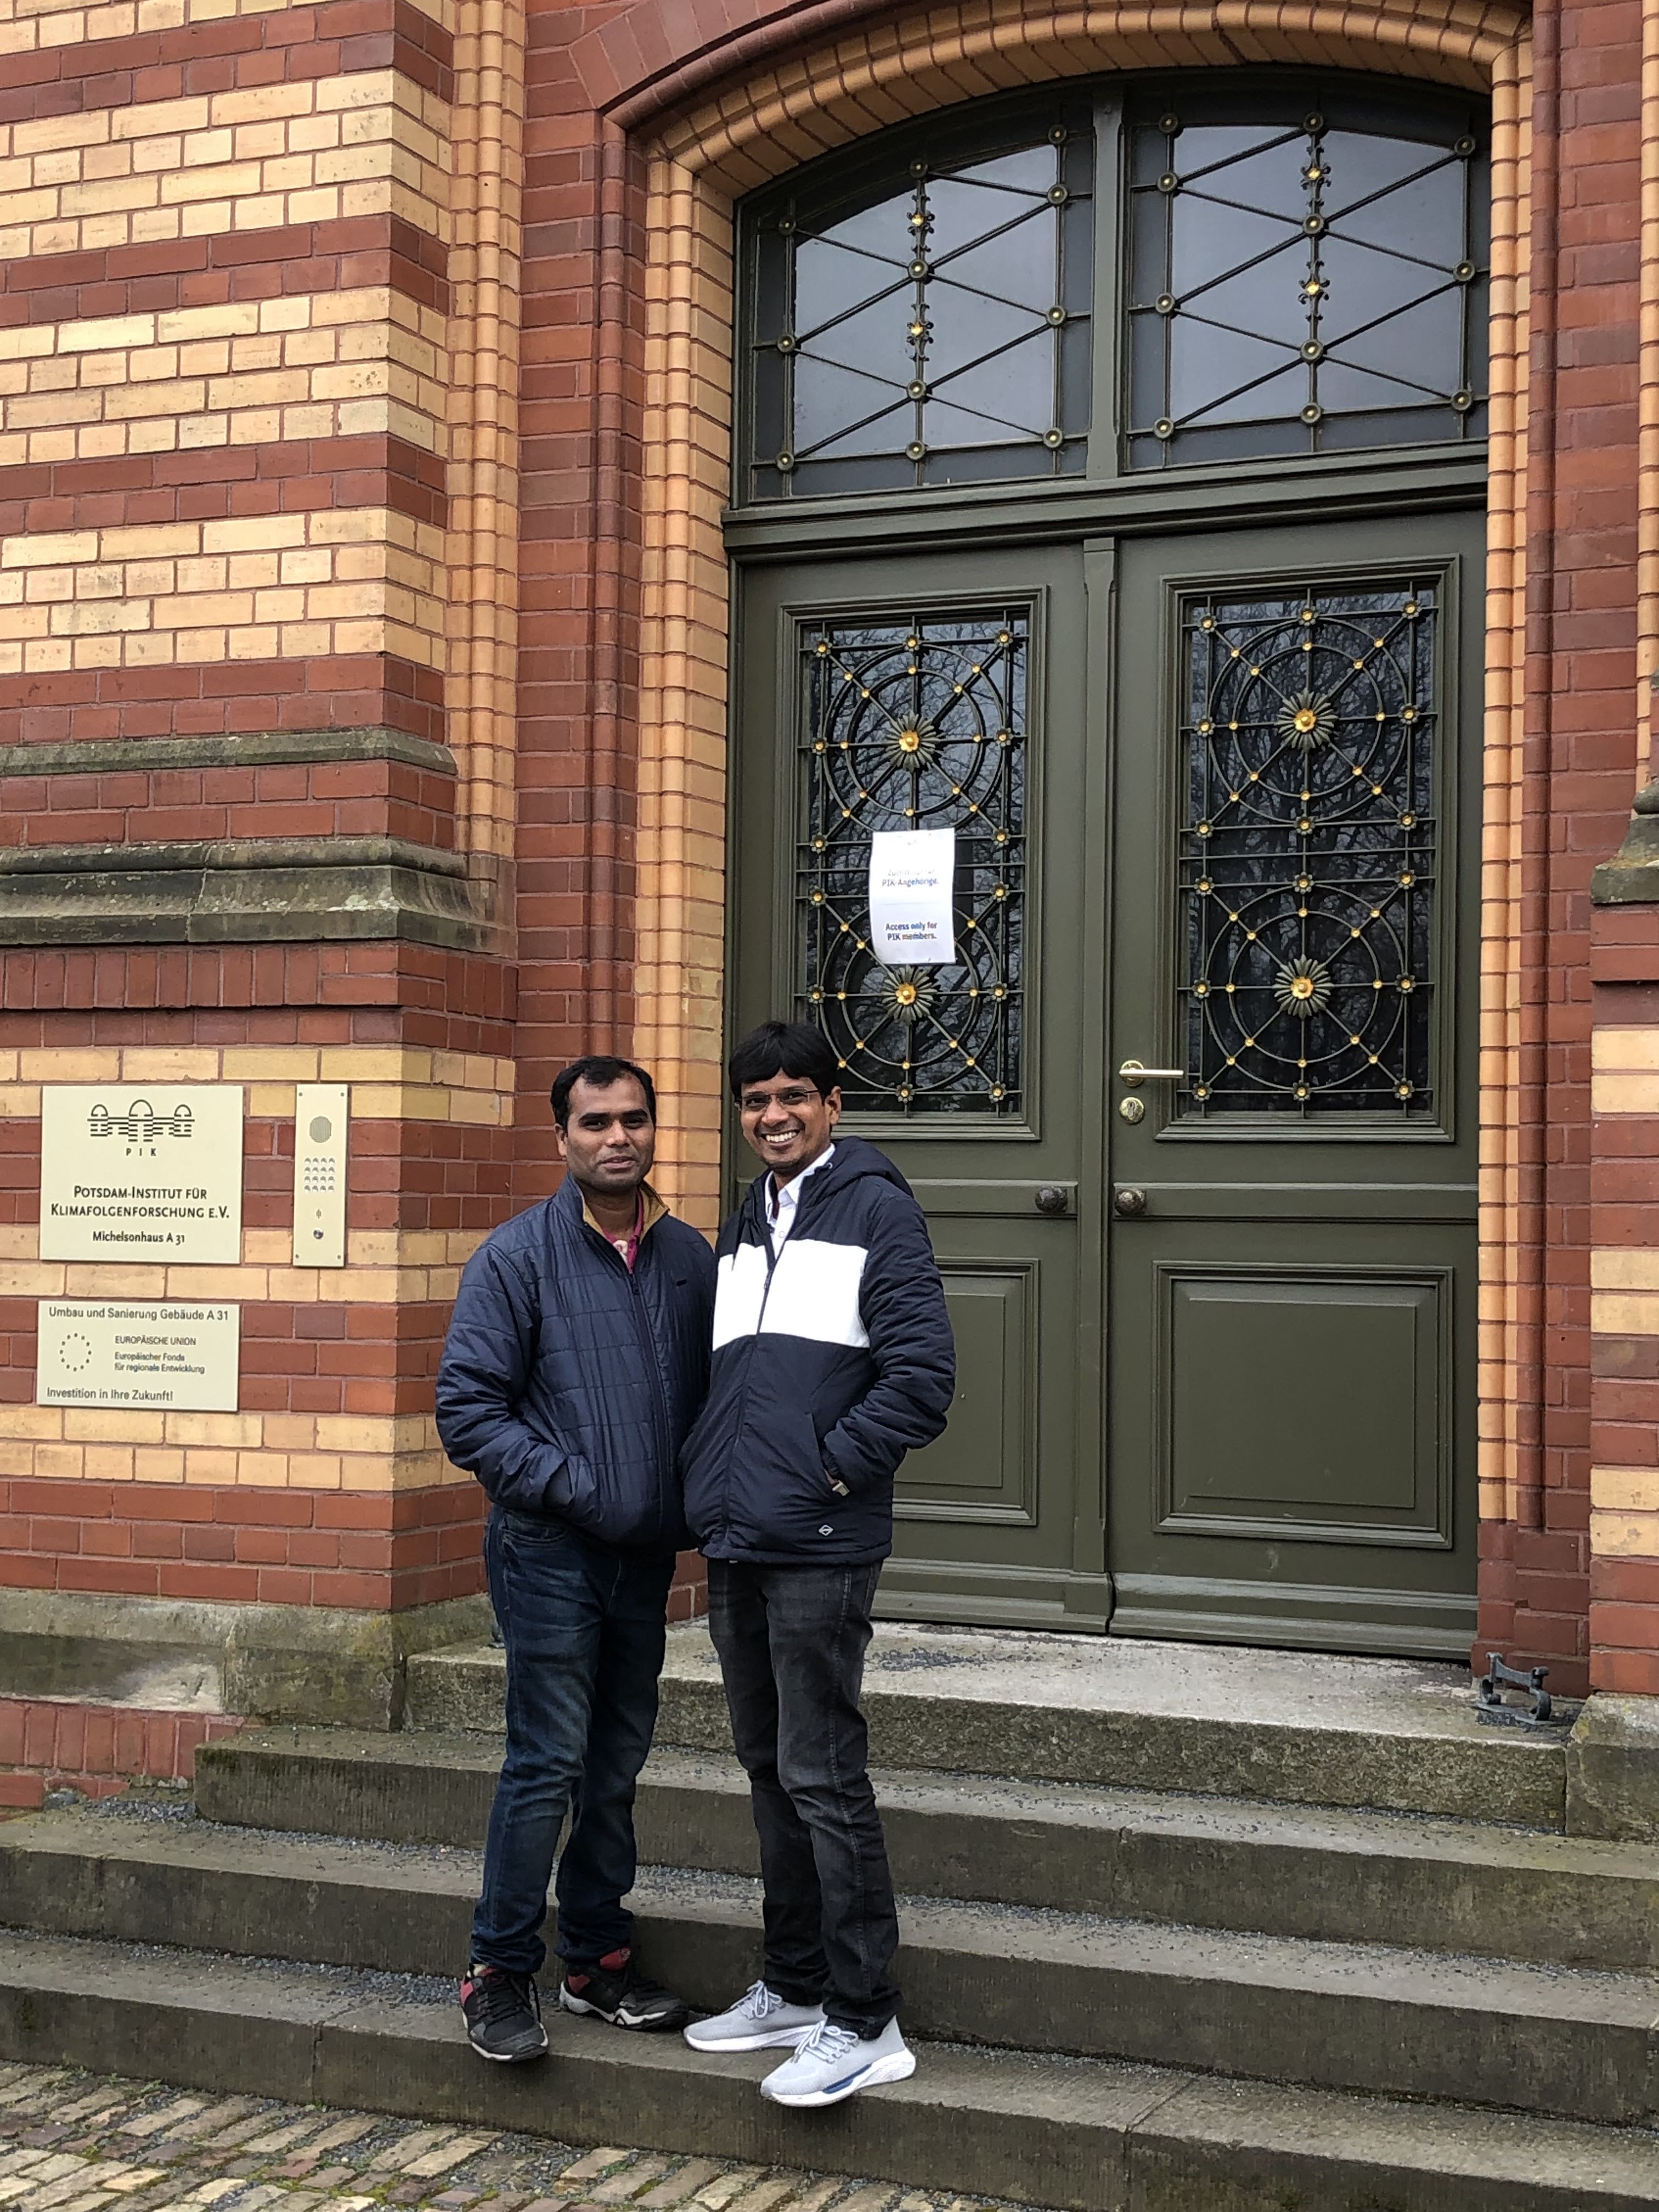 B-EPICC Welcomes two Guest Researchers from India